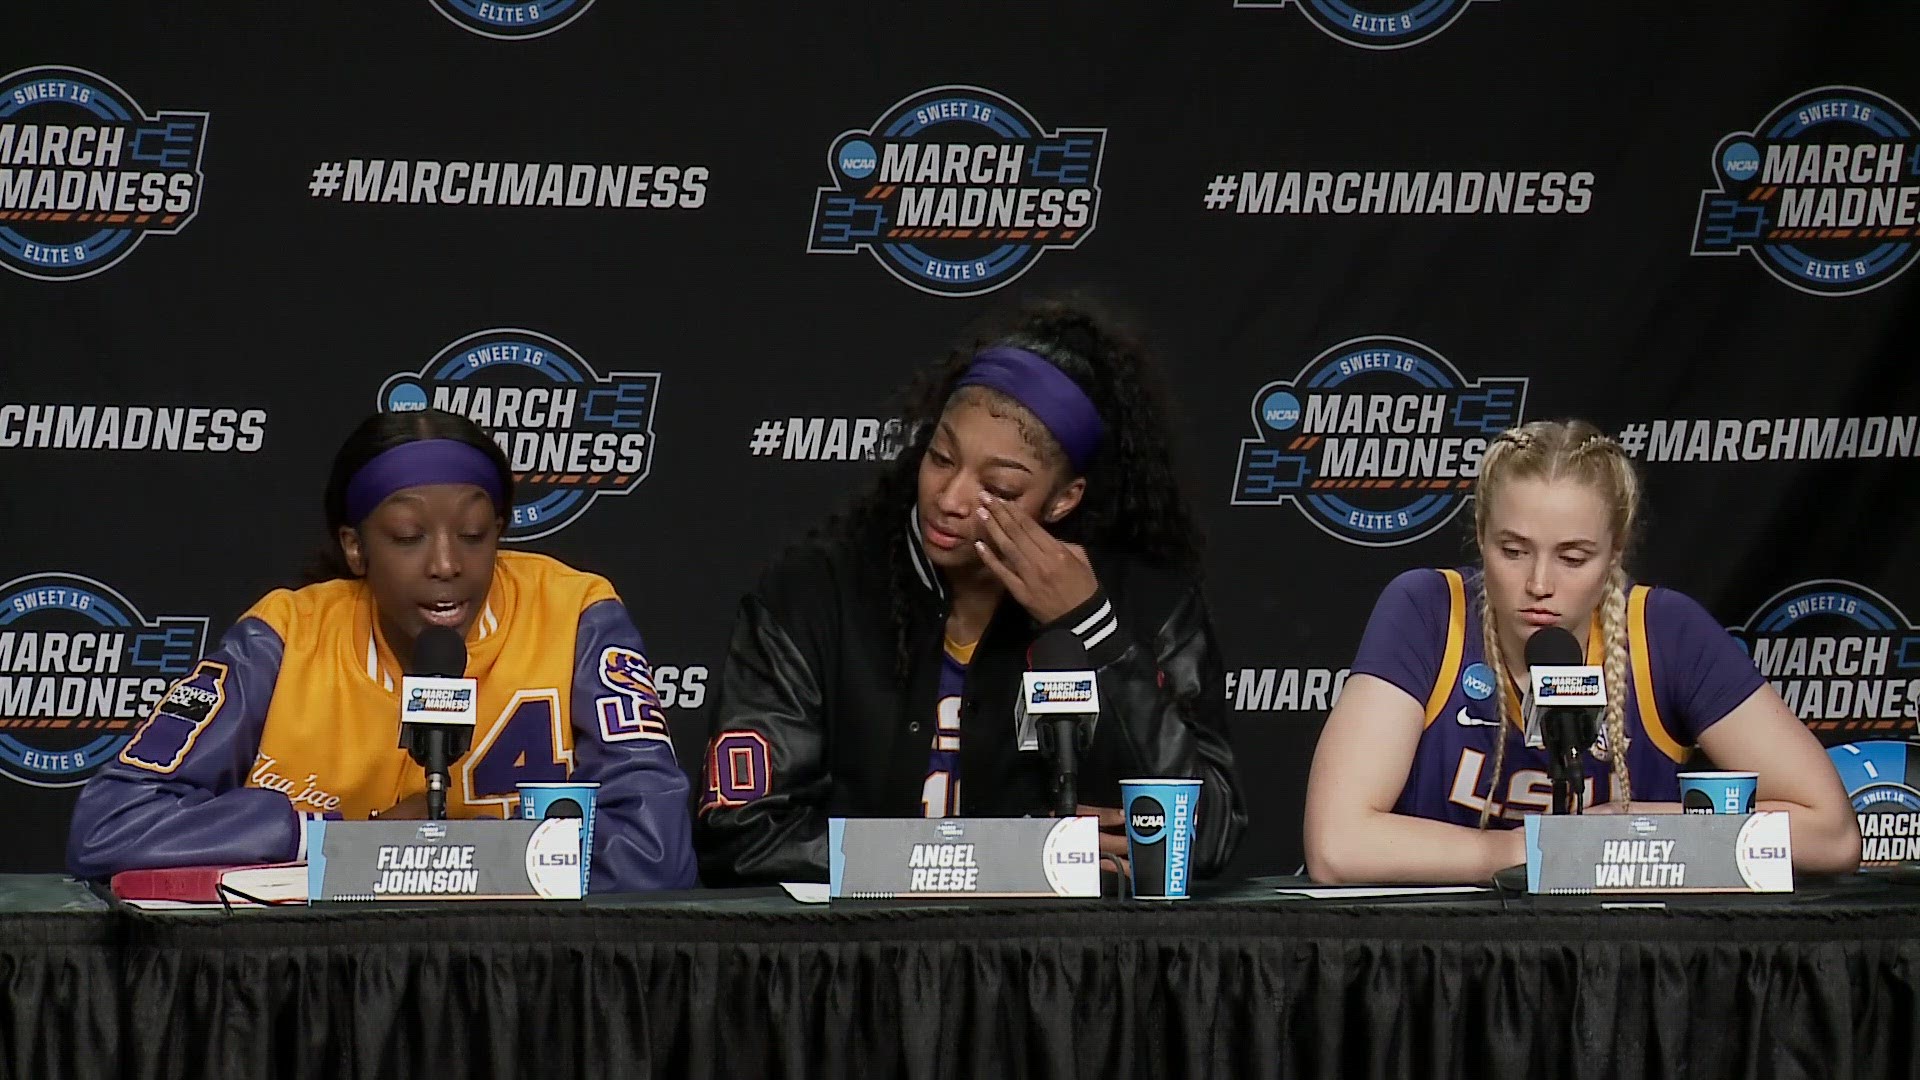 LSU's Angel Reese received compliments from her teammates, Flau'jae Johnson and Hailey Van Lith following the team's loss to Iowa in the Elite Eight.